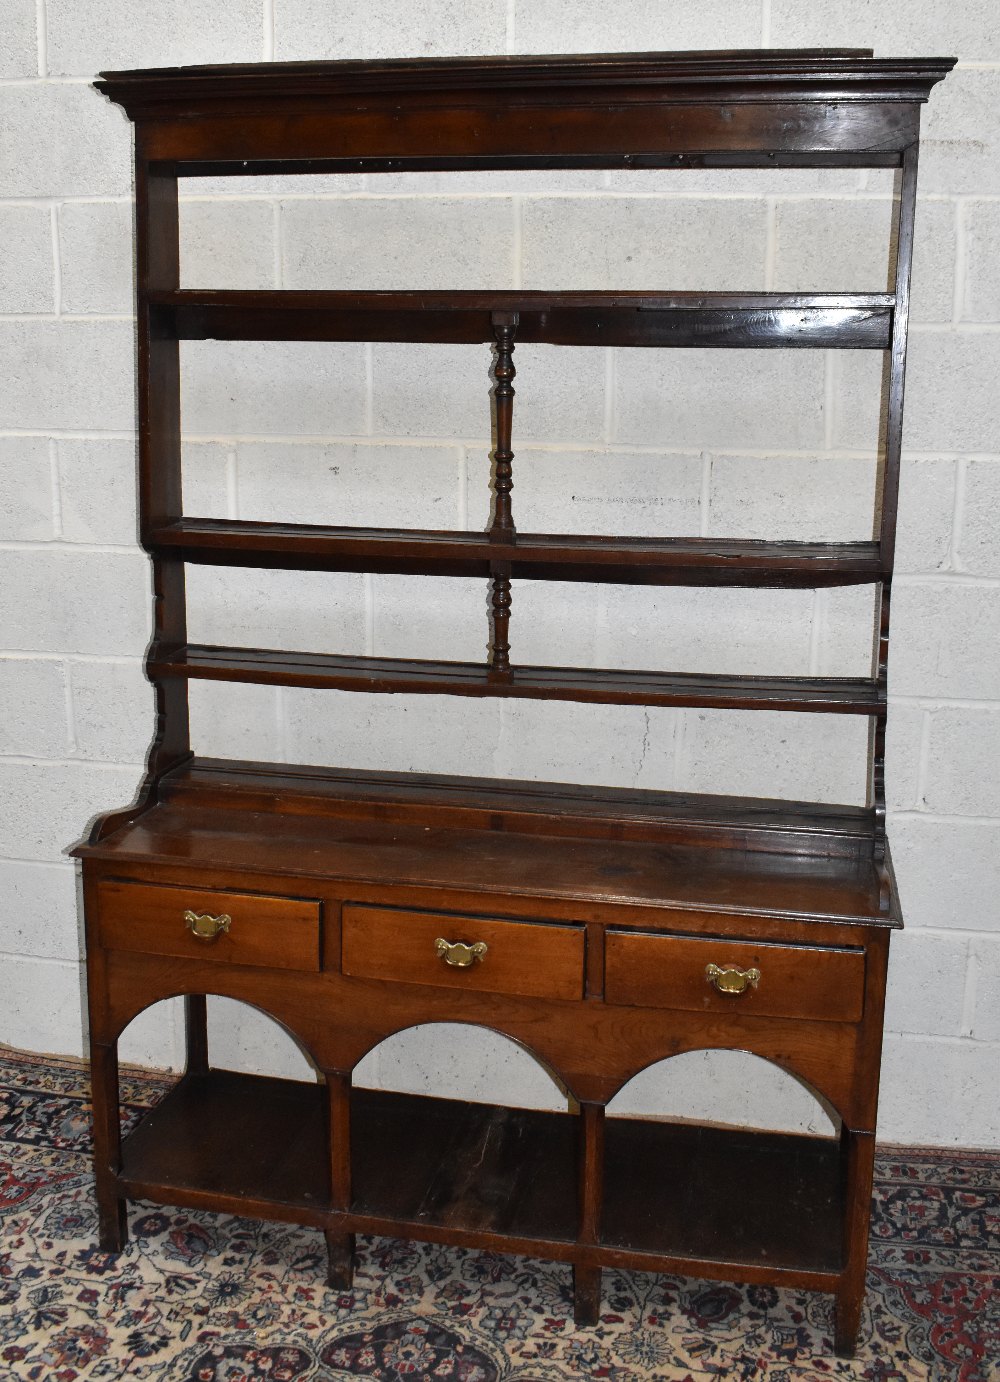 An 18th century oak dresser, with open plate rack back having central turned spindles and three